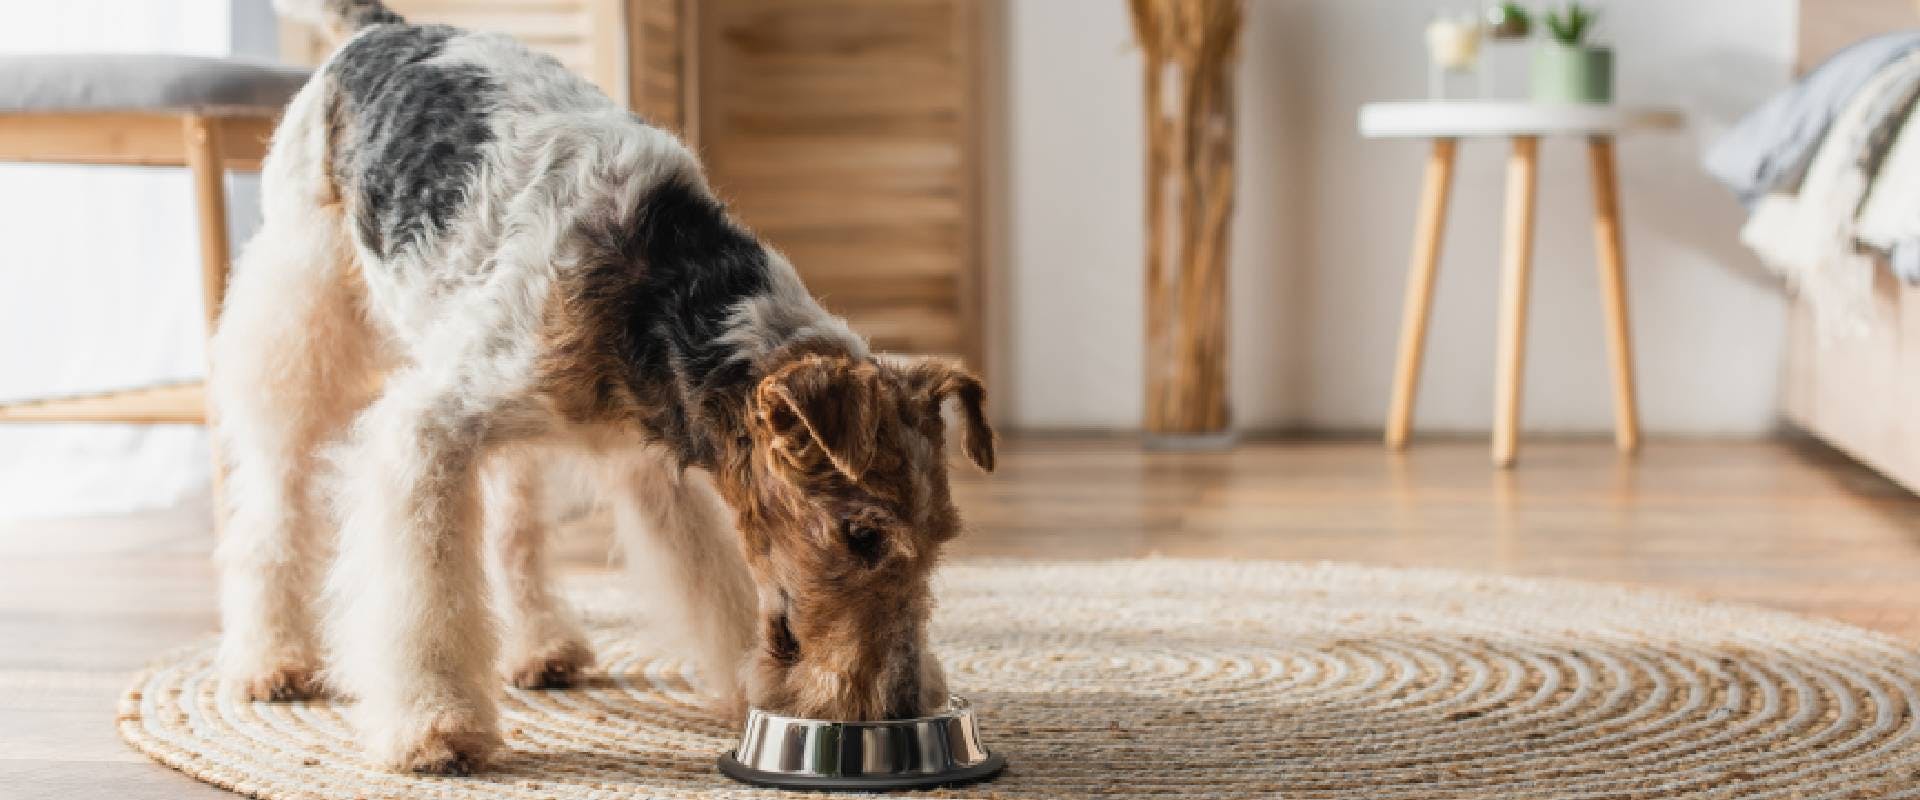 Wire-haired fox terrier eating pet food from bowl